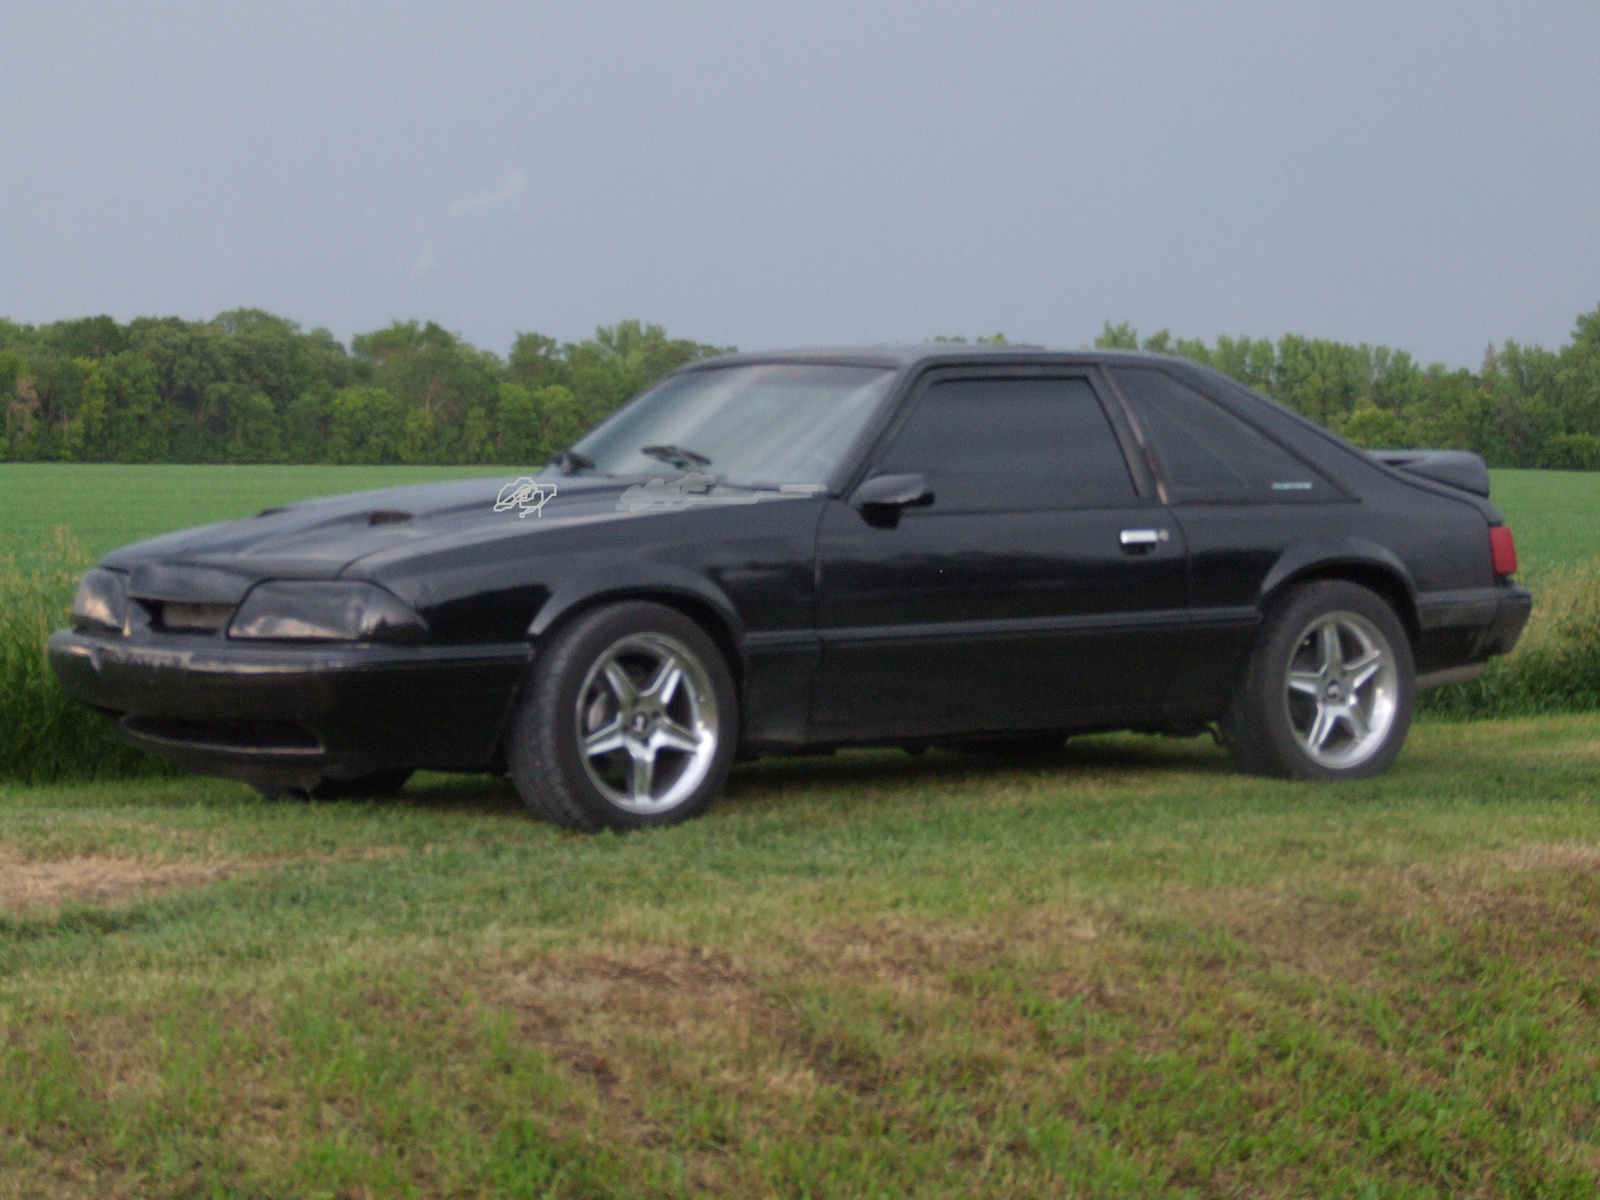 1991 Ford mustang lx 5.0 specs #4